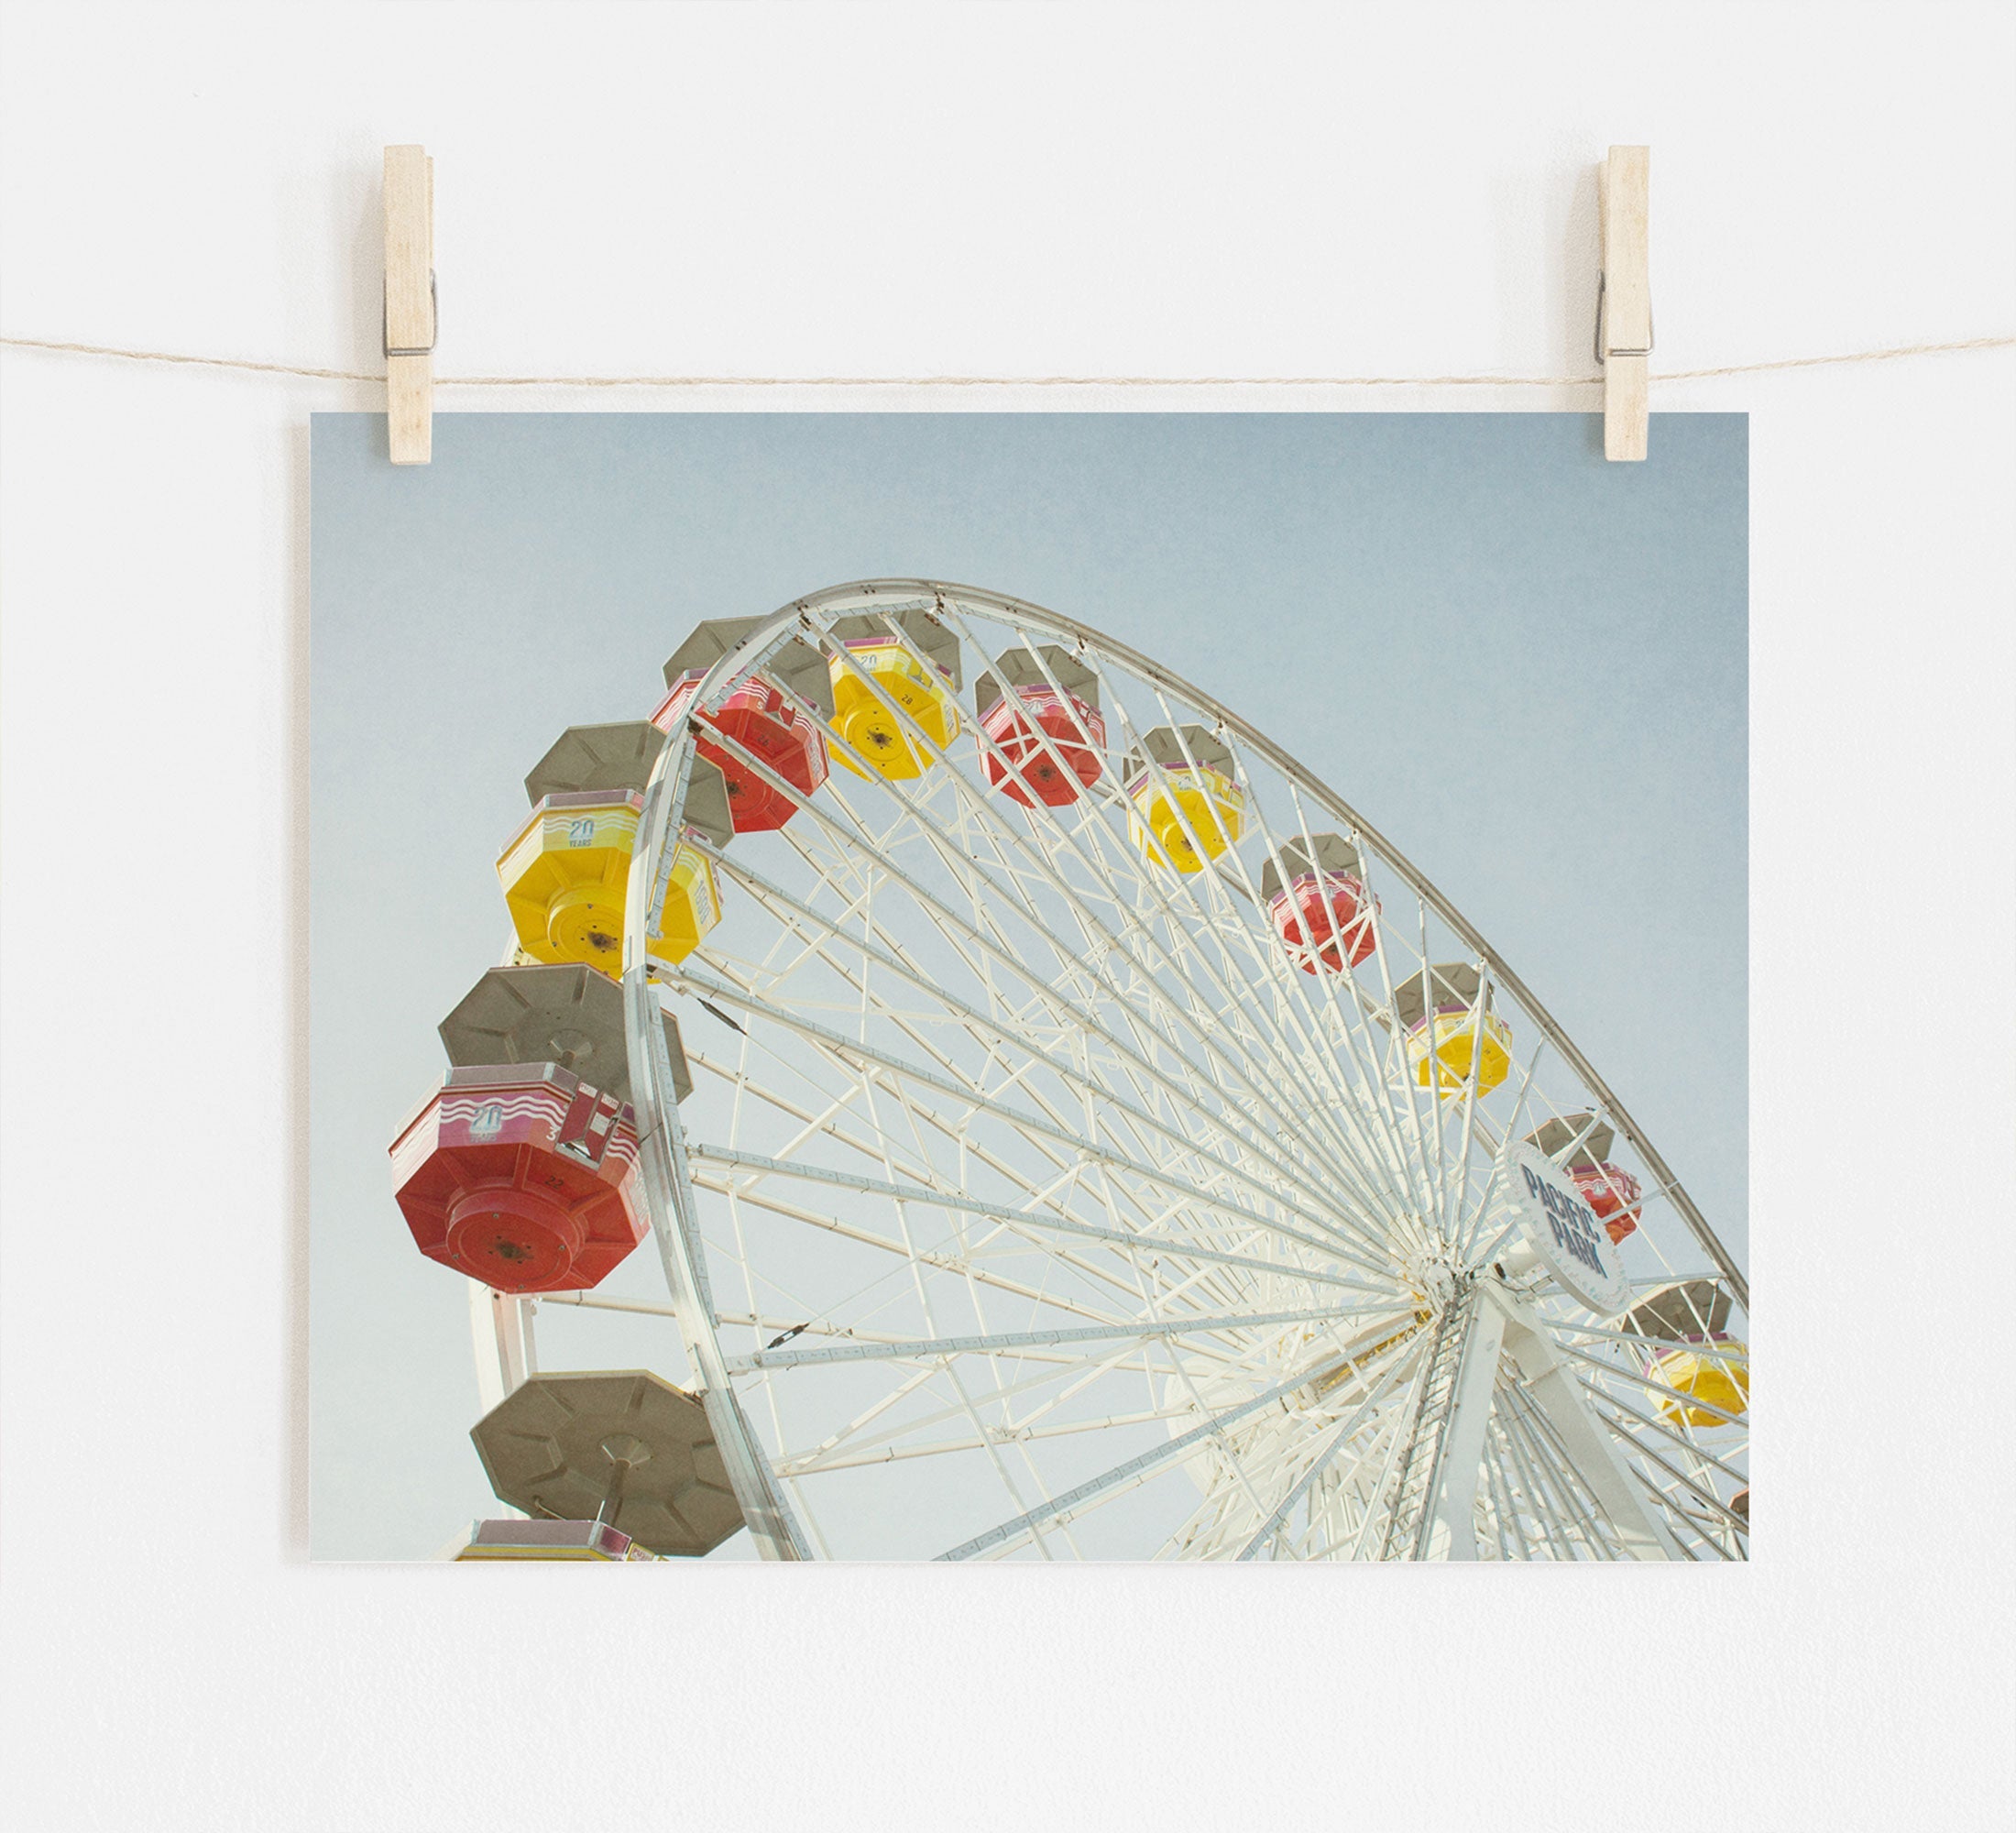 A photograph of a colorful Santa Monica Ferris Wheel Print, 'Ferris Above' by Offley Green is clipped to a string by wooden clothespins against a white wall. The sky is clear and blue in the background.